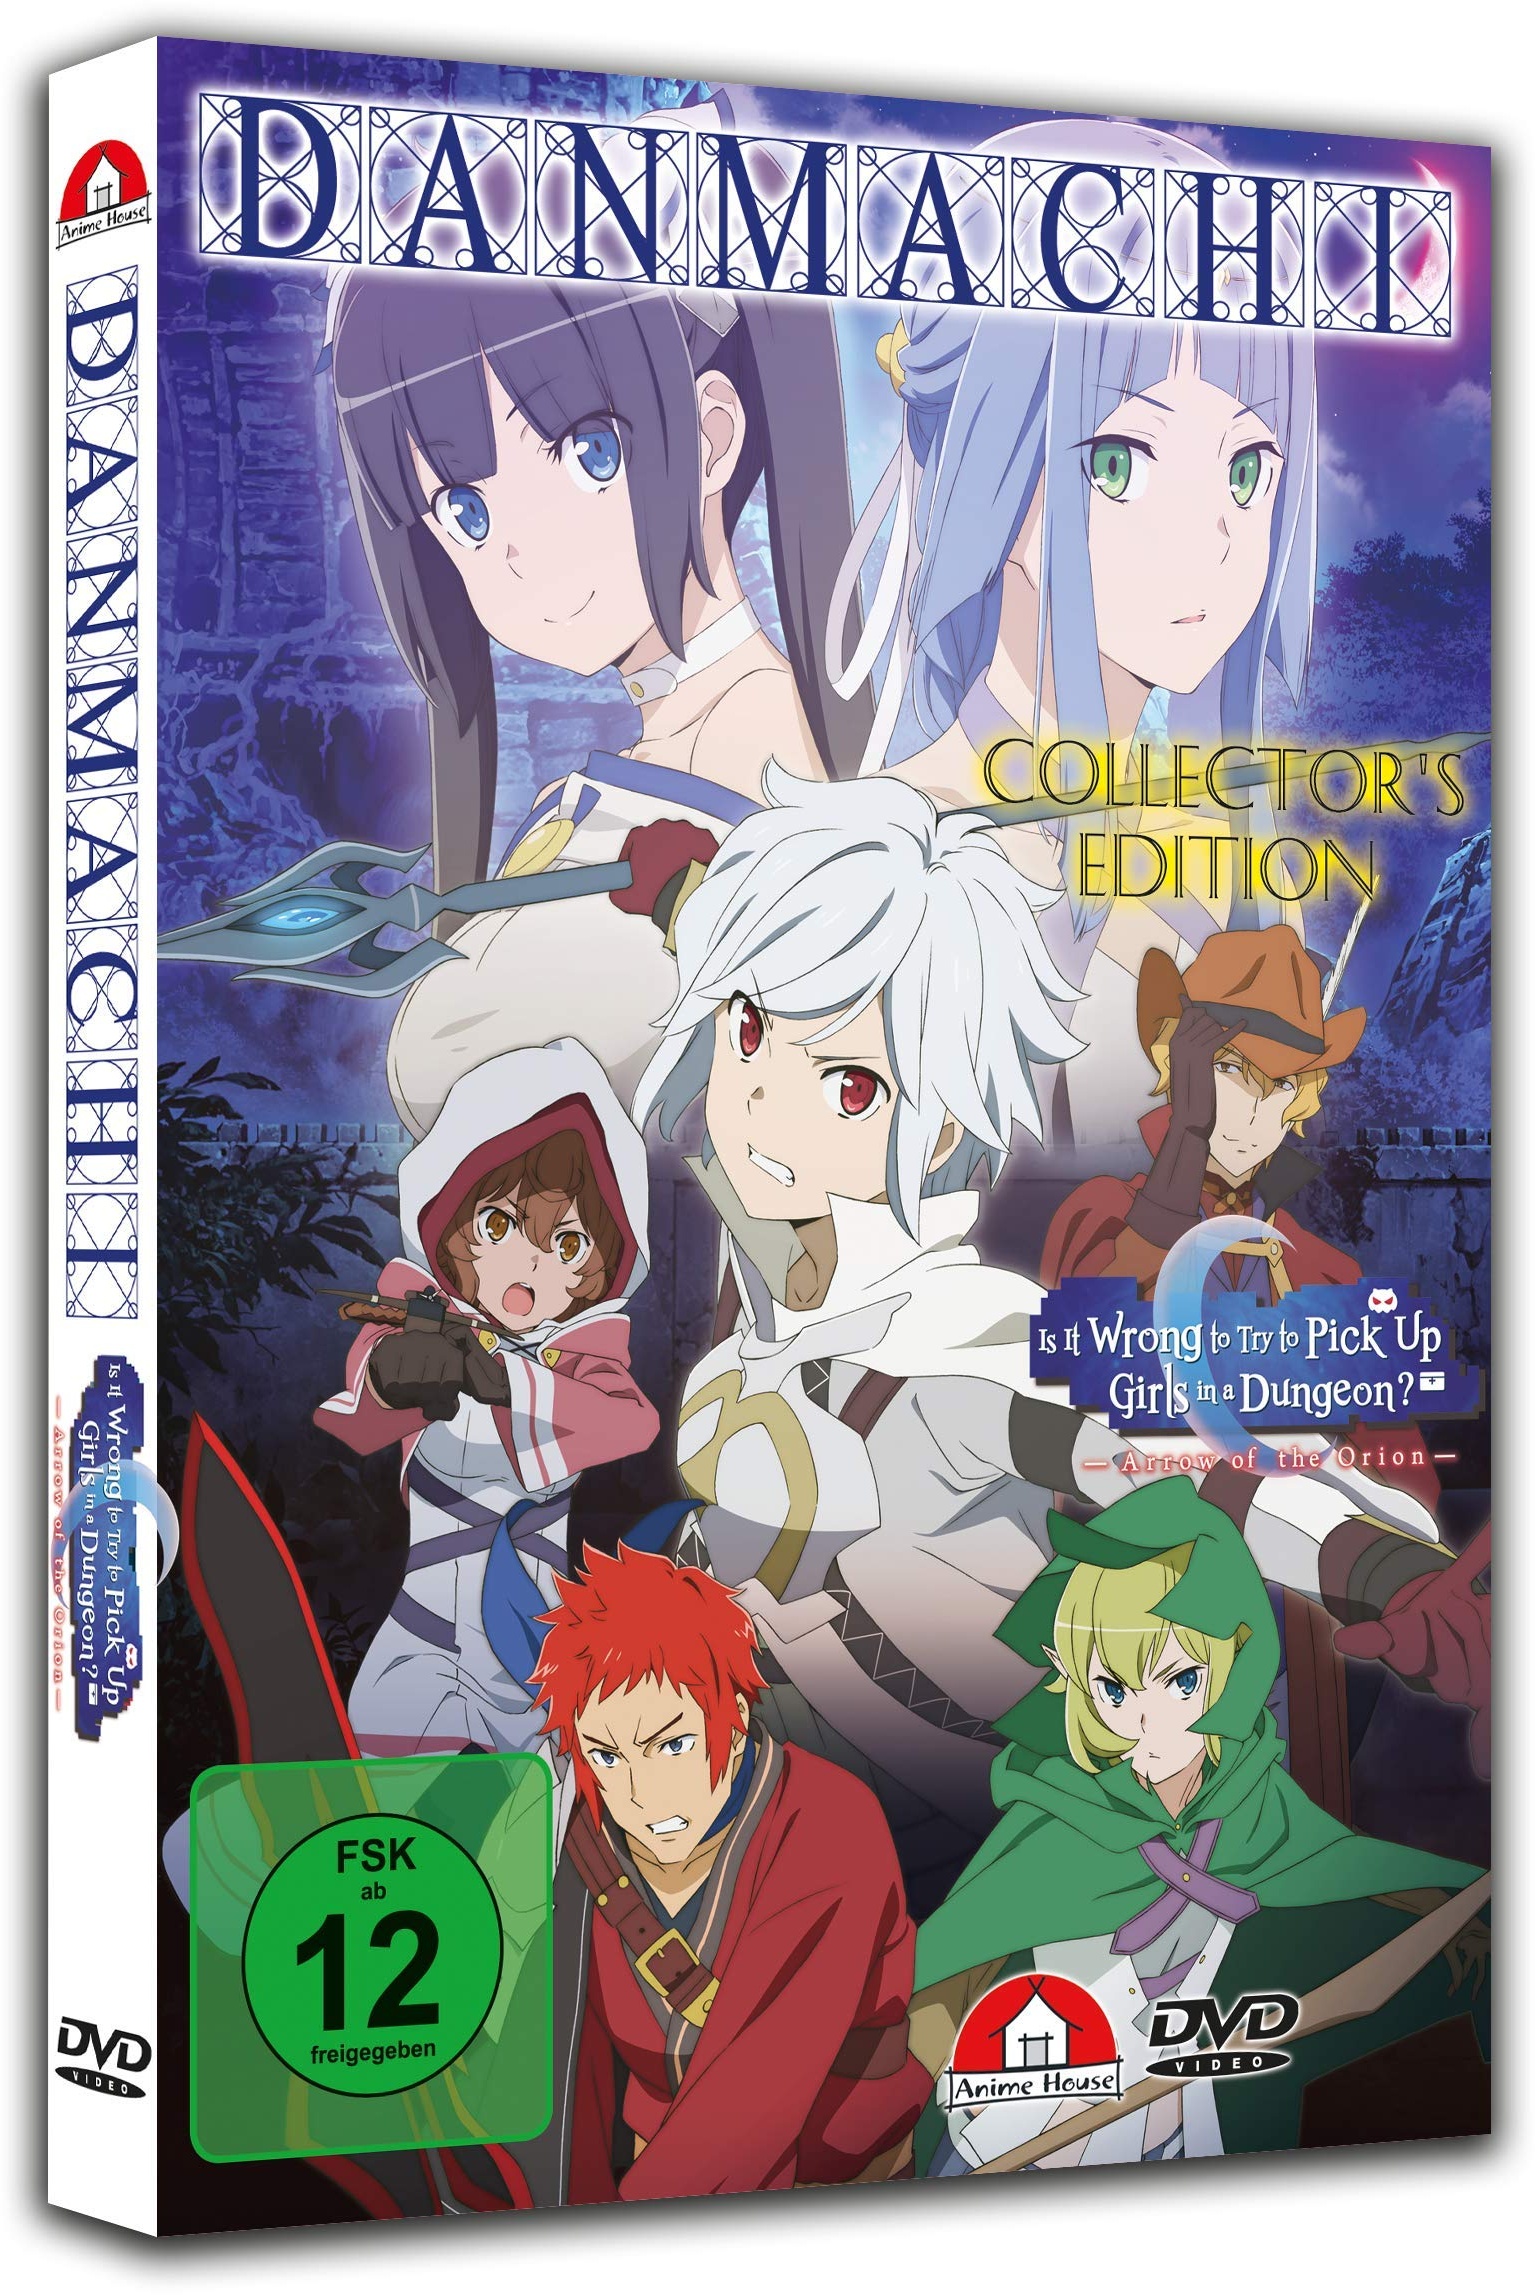 Danmachi: Arrow of Orion - The Movie - [DVD] Collector’s Edition